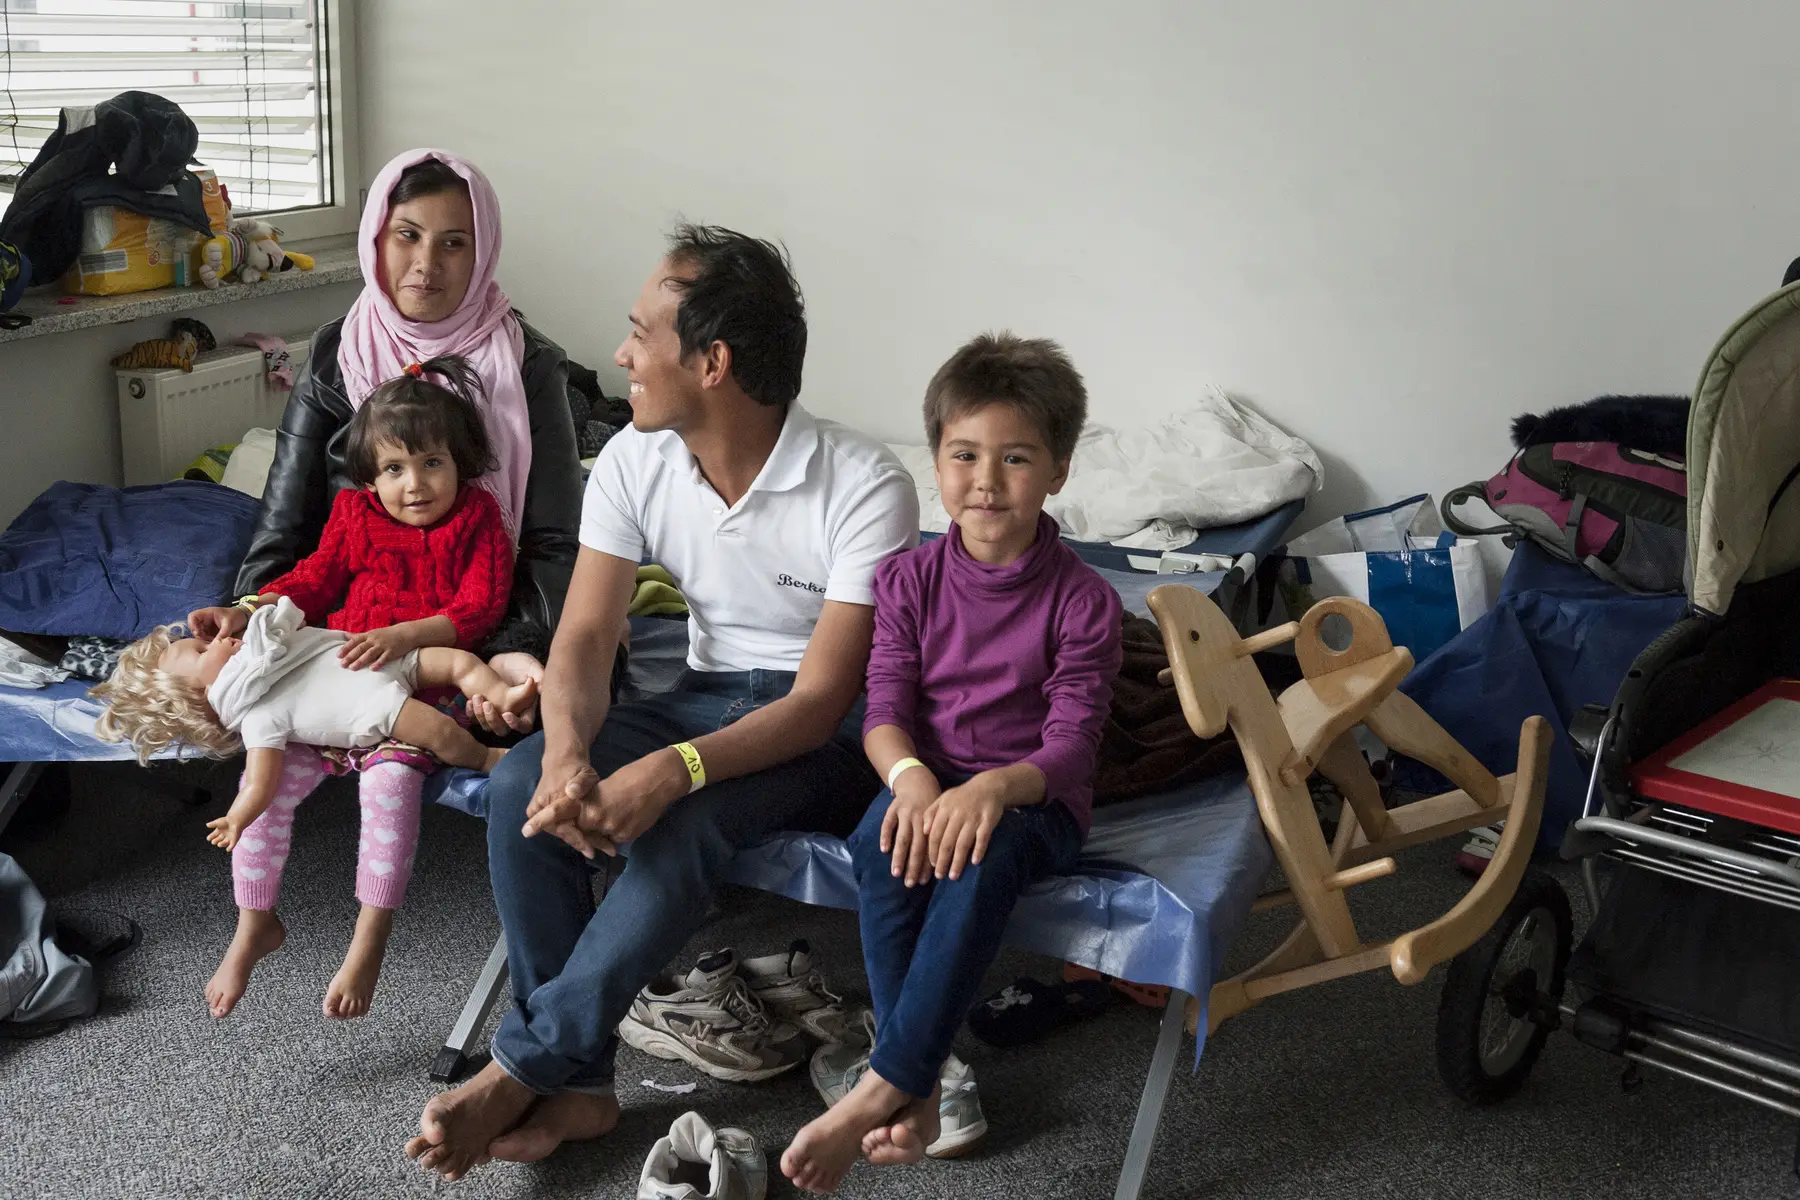 A refugee family in France